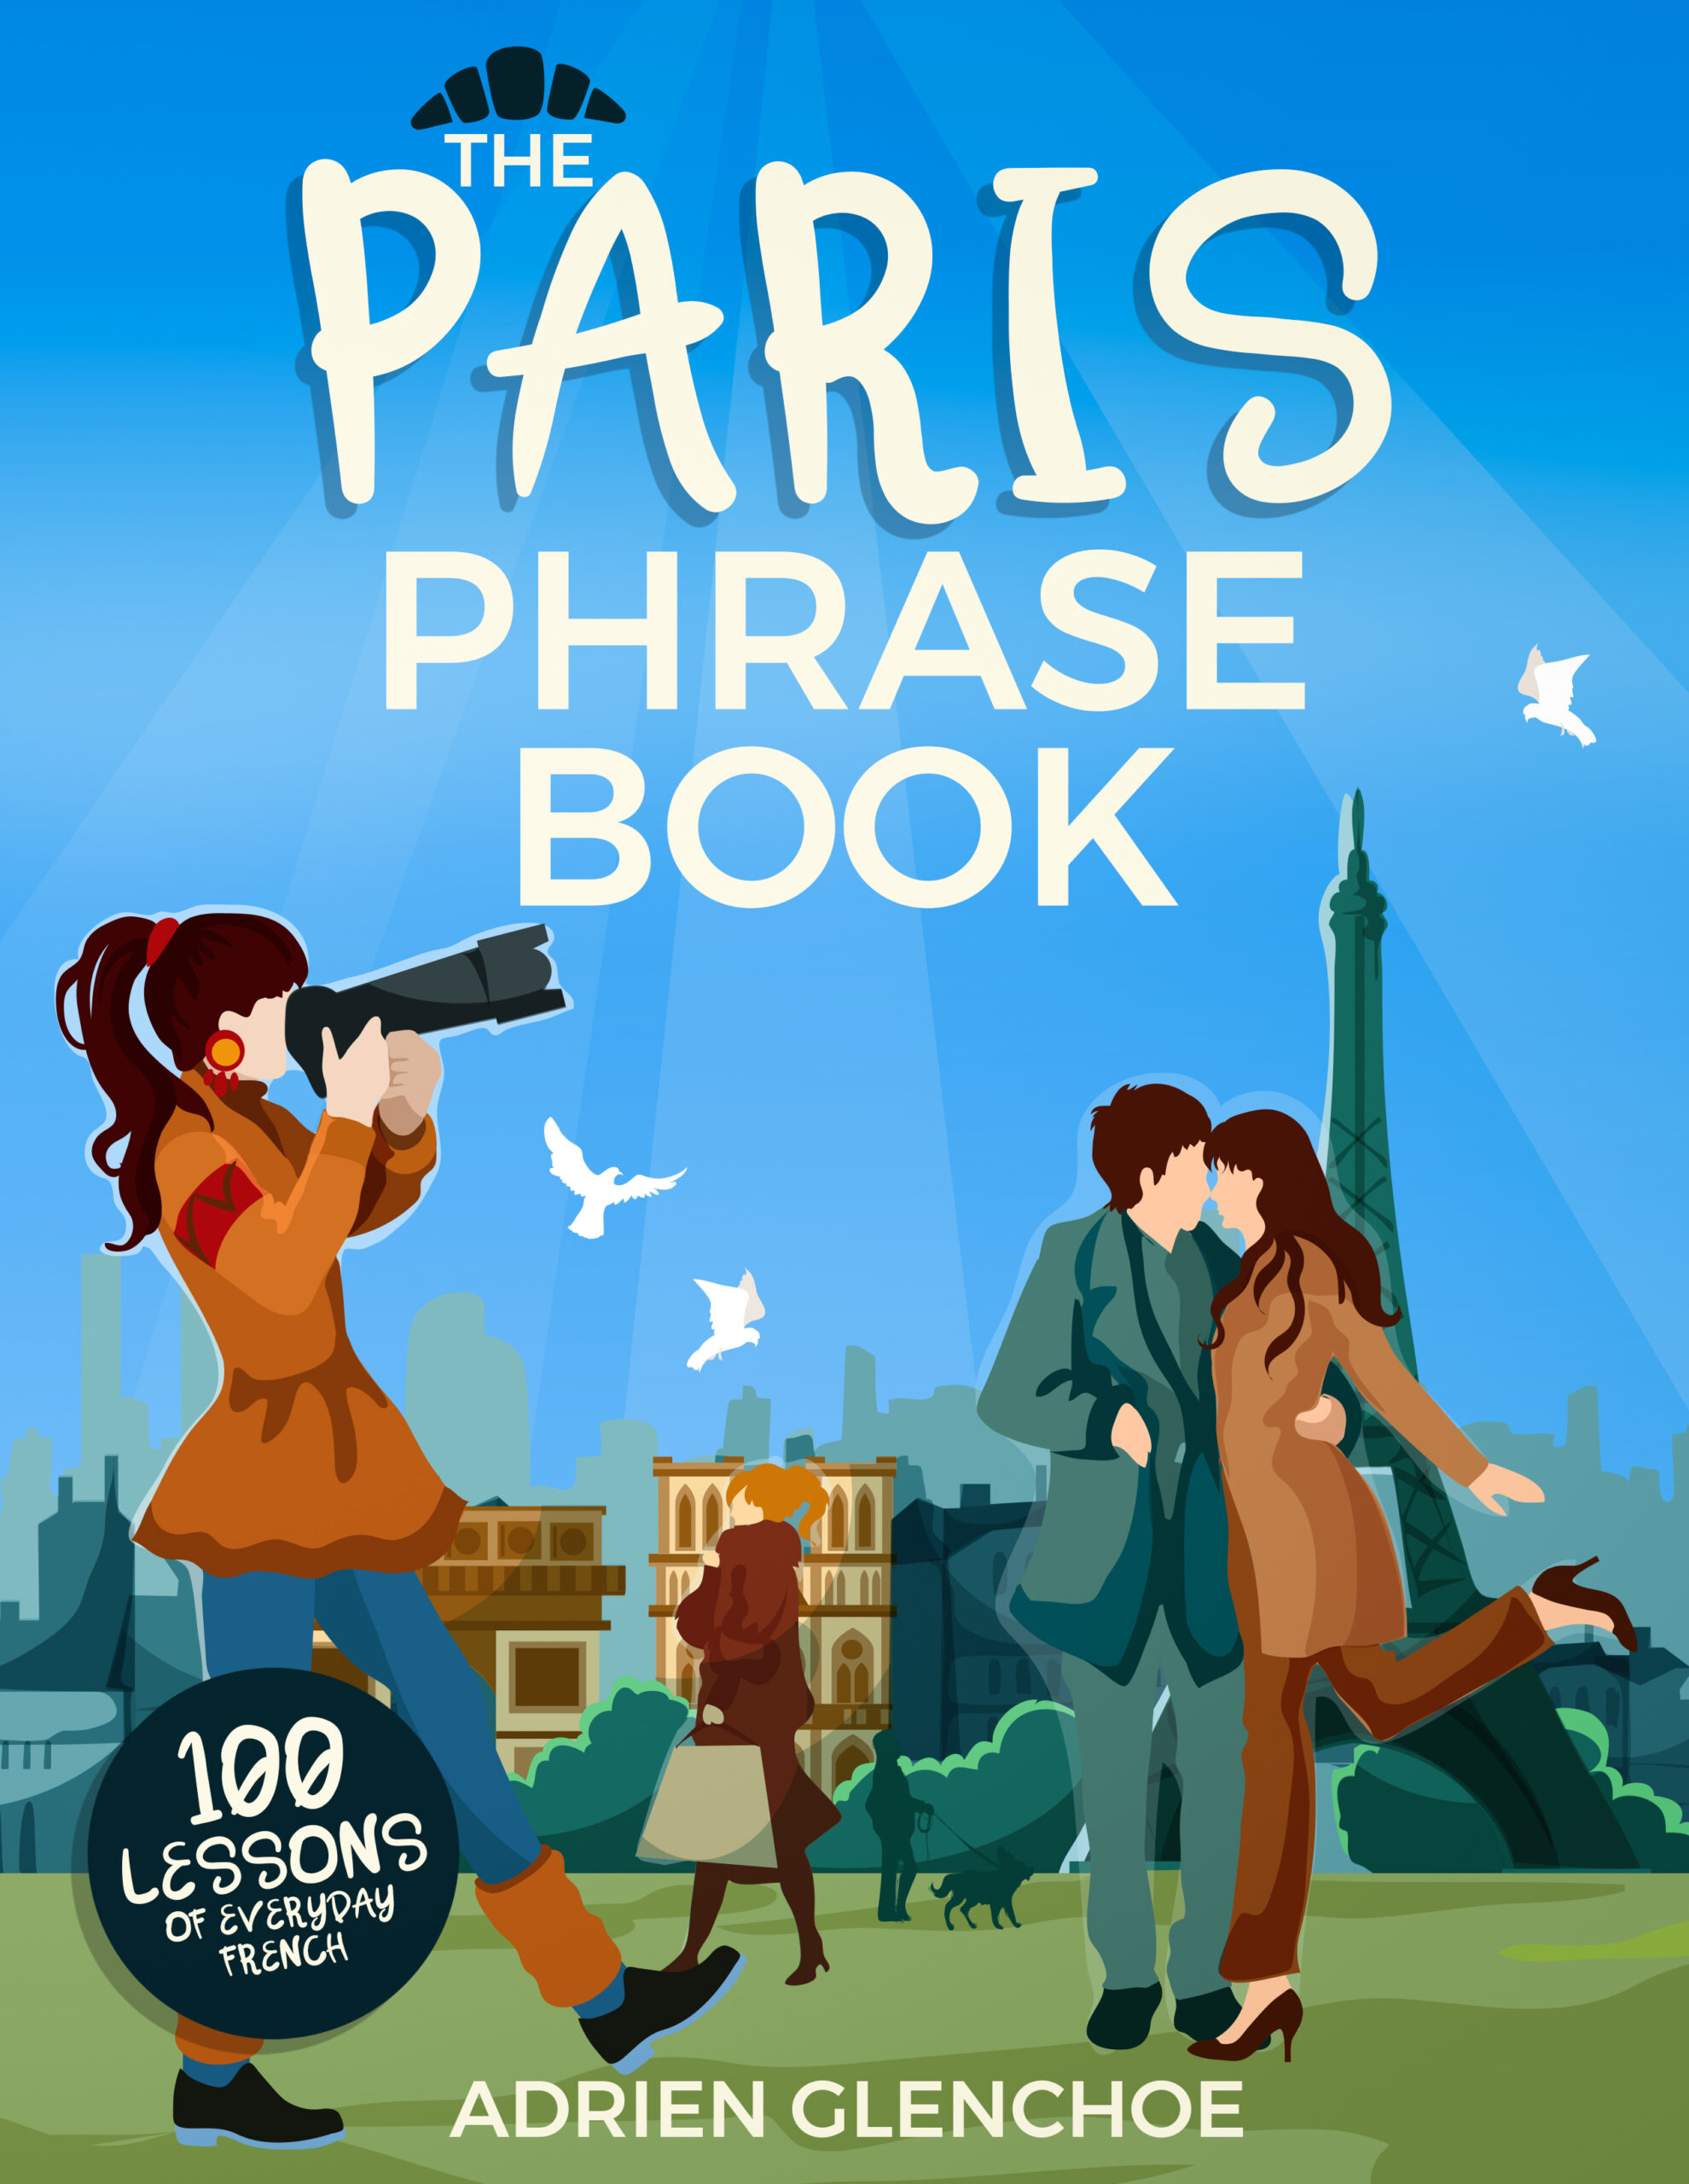 FREE: The paris phrase book by Adrien Glenchoe